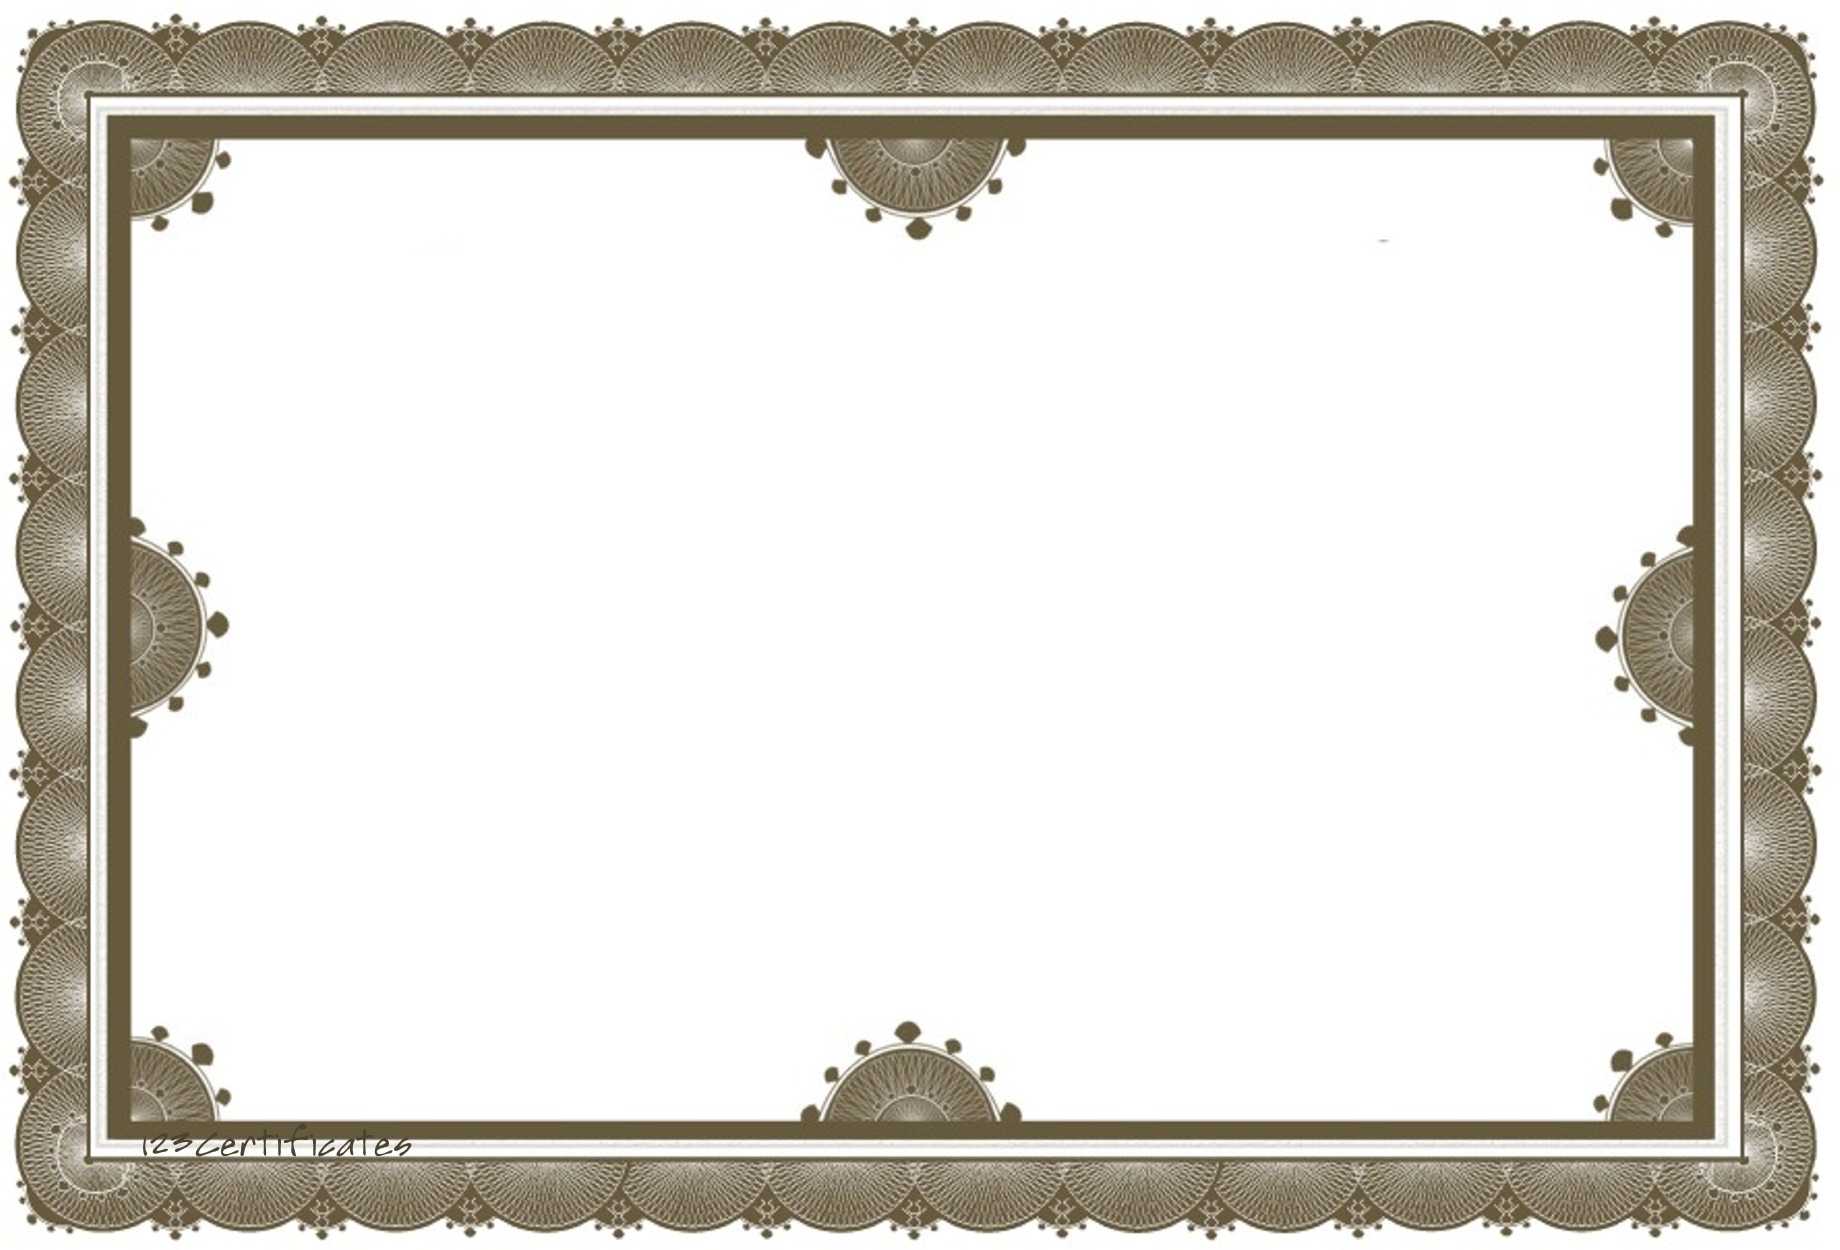 Free Certificate Borders To Download With Award Certificate Border Template